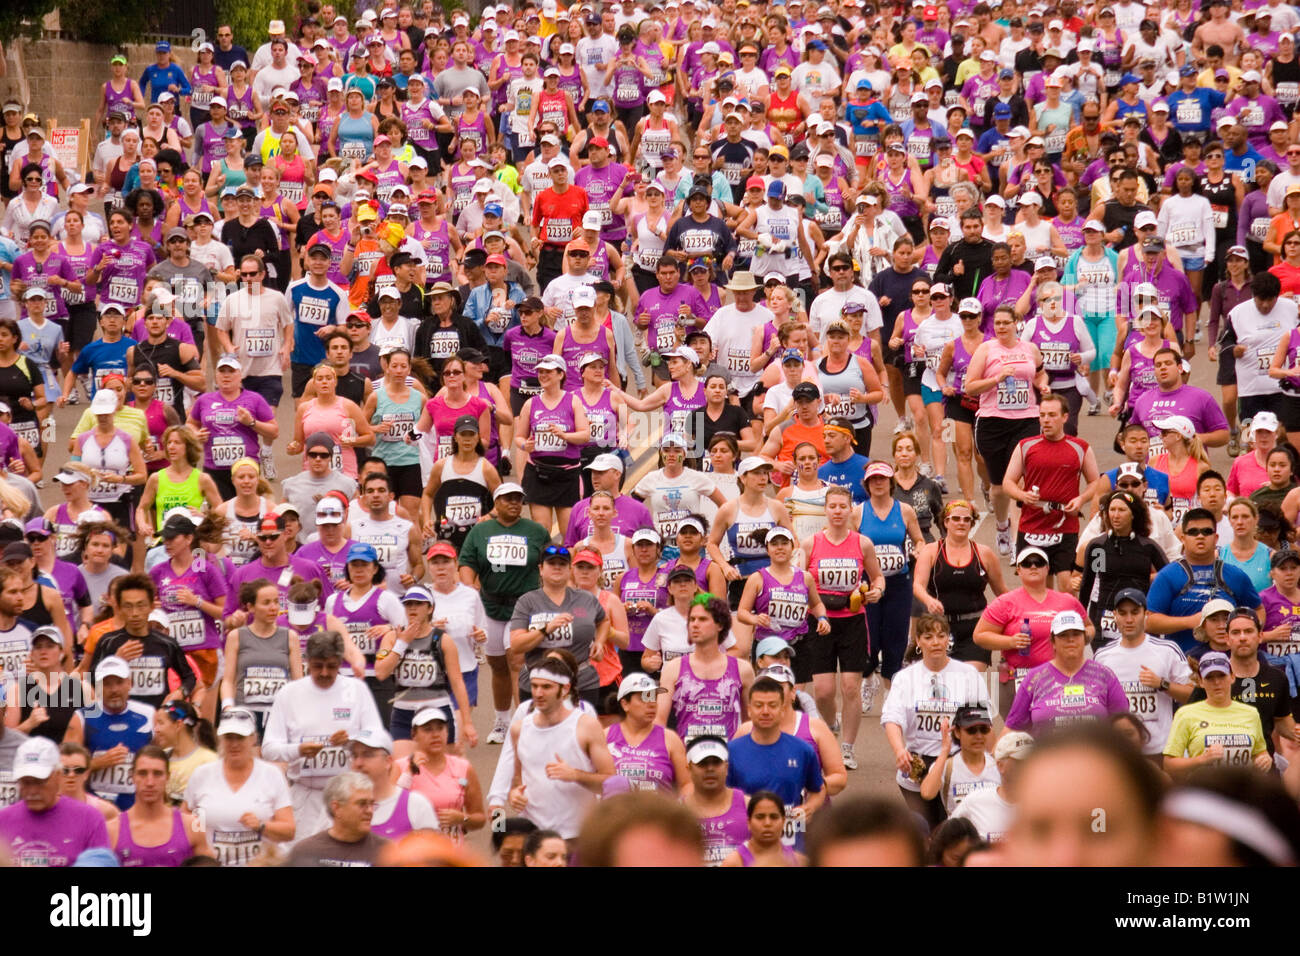 Thousands of participants at the start begin the 26 mile run of a  marathon race. Stock Photo